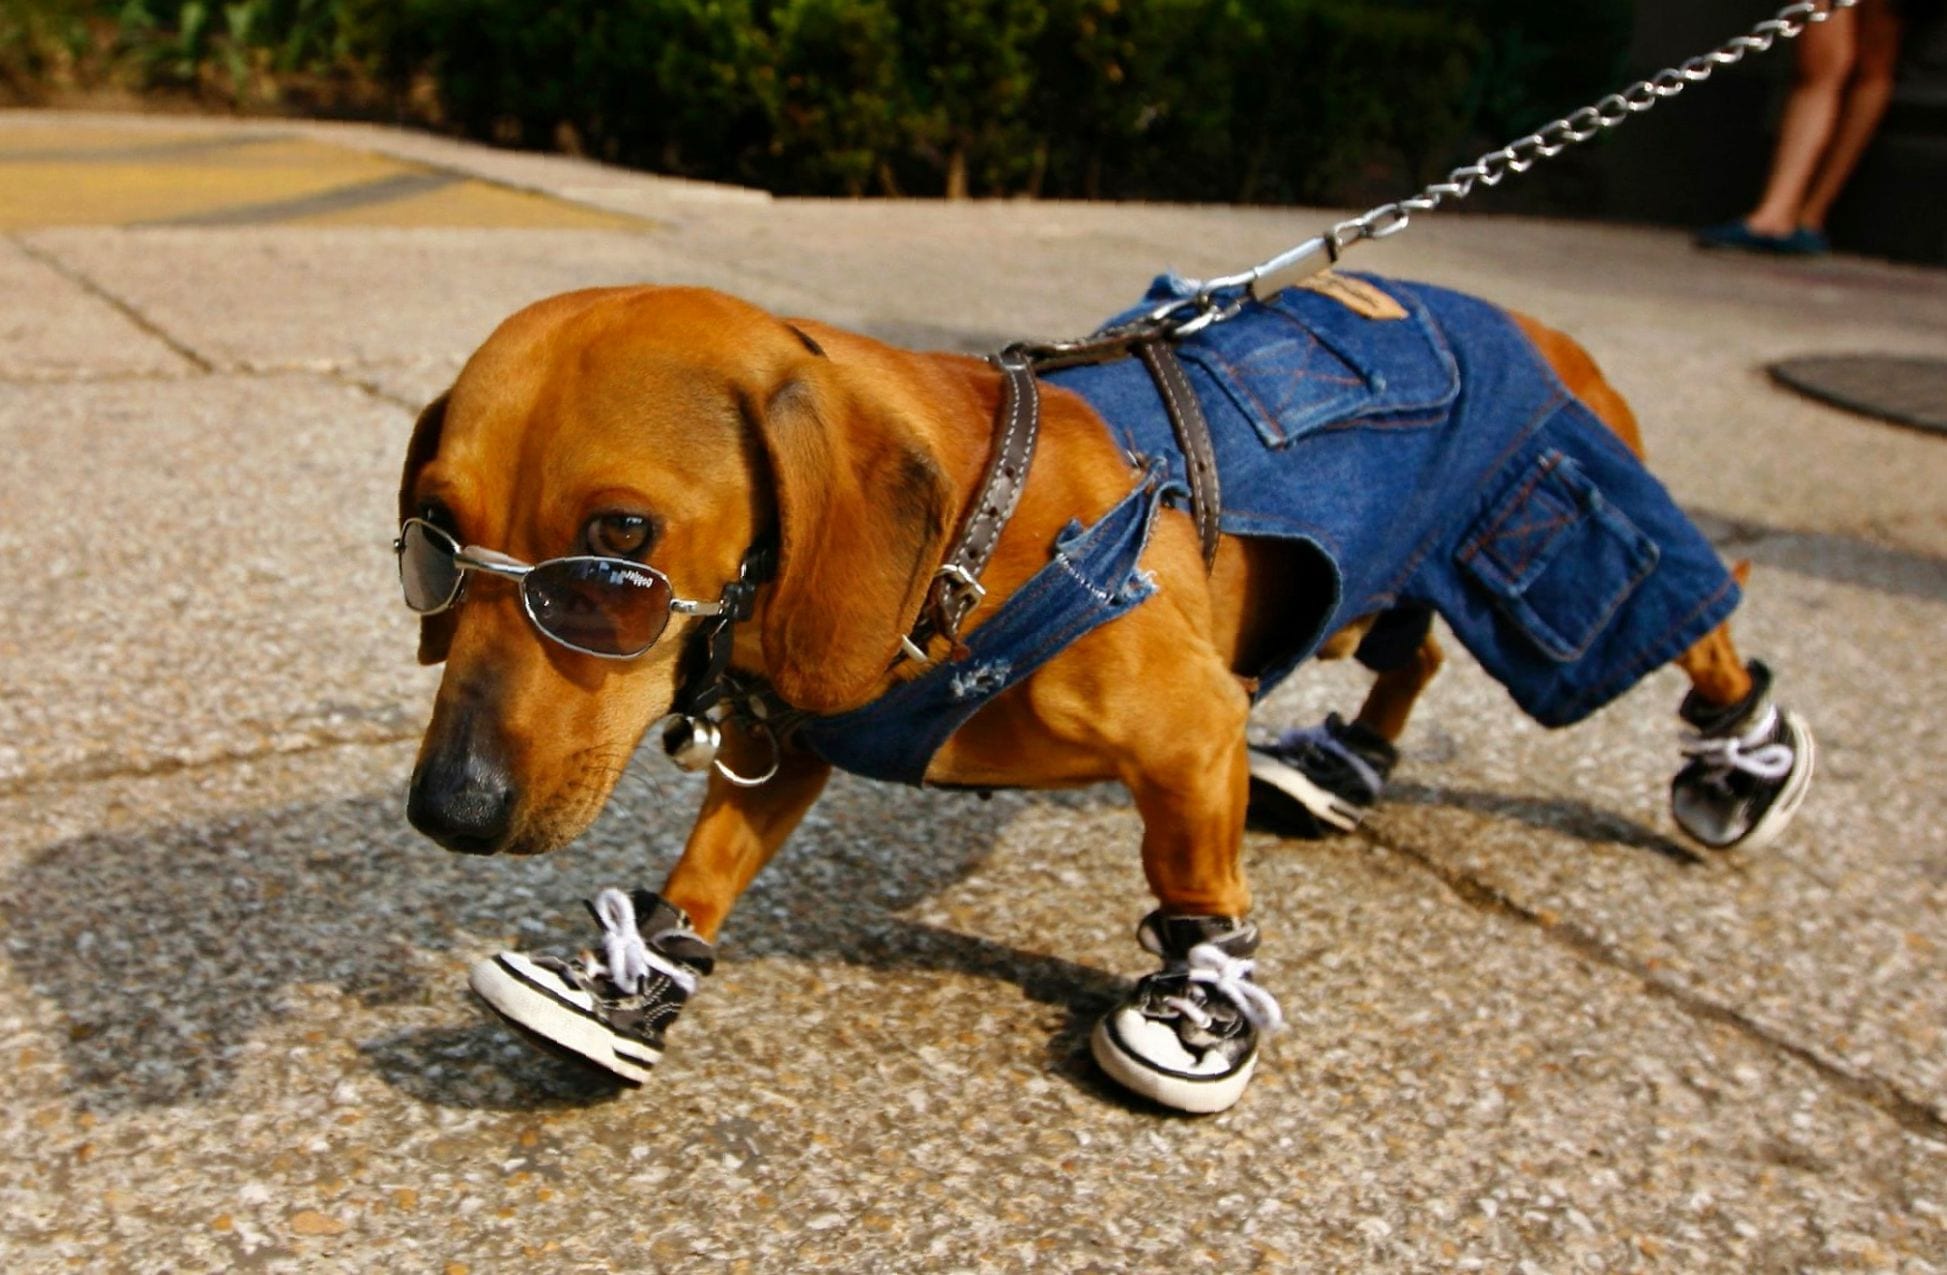 A Dachshund wearing denim short, sunglasses, and shoes while walking in the street